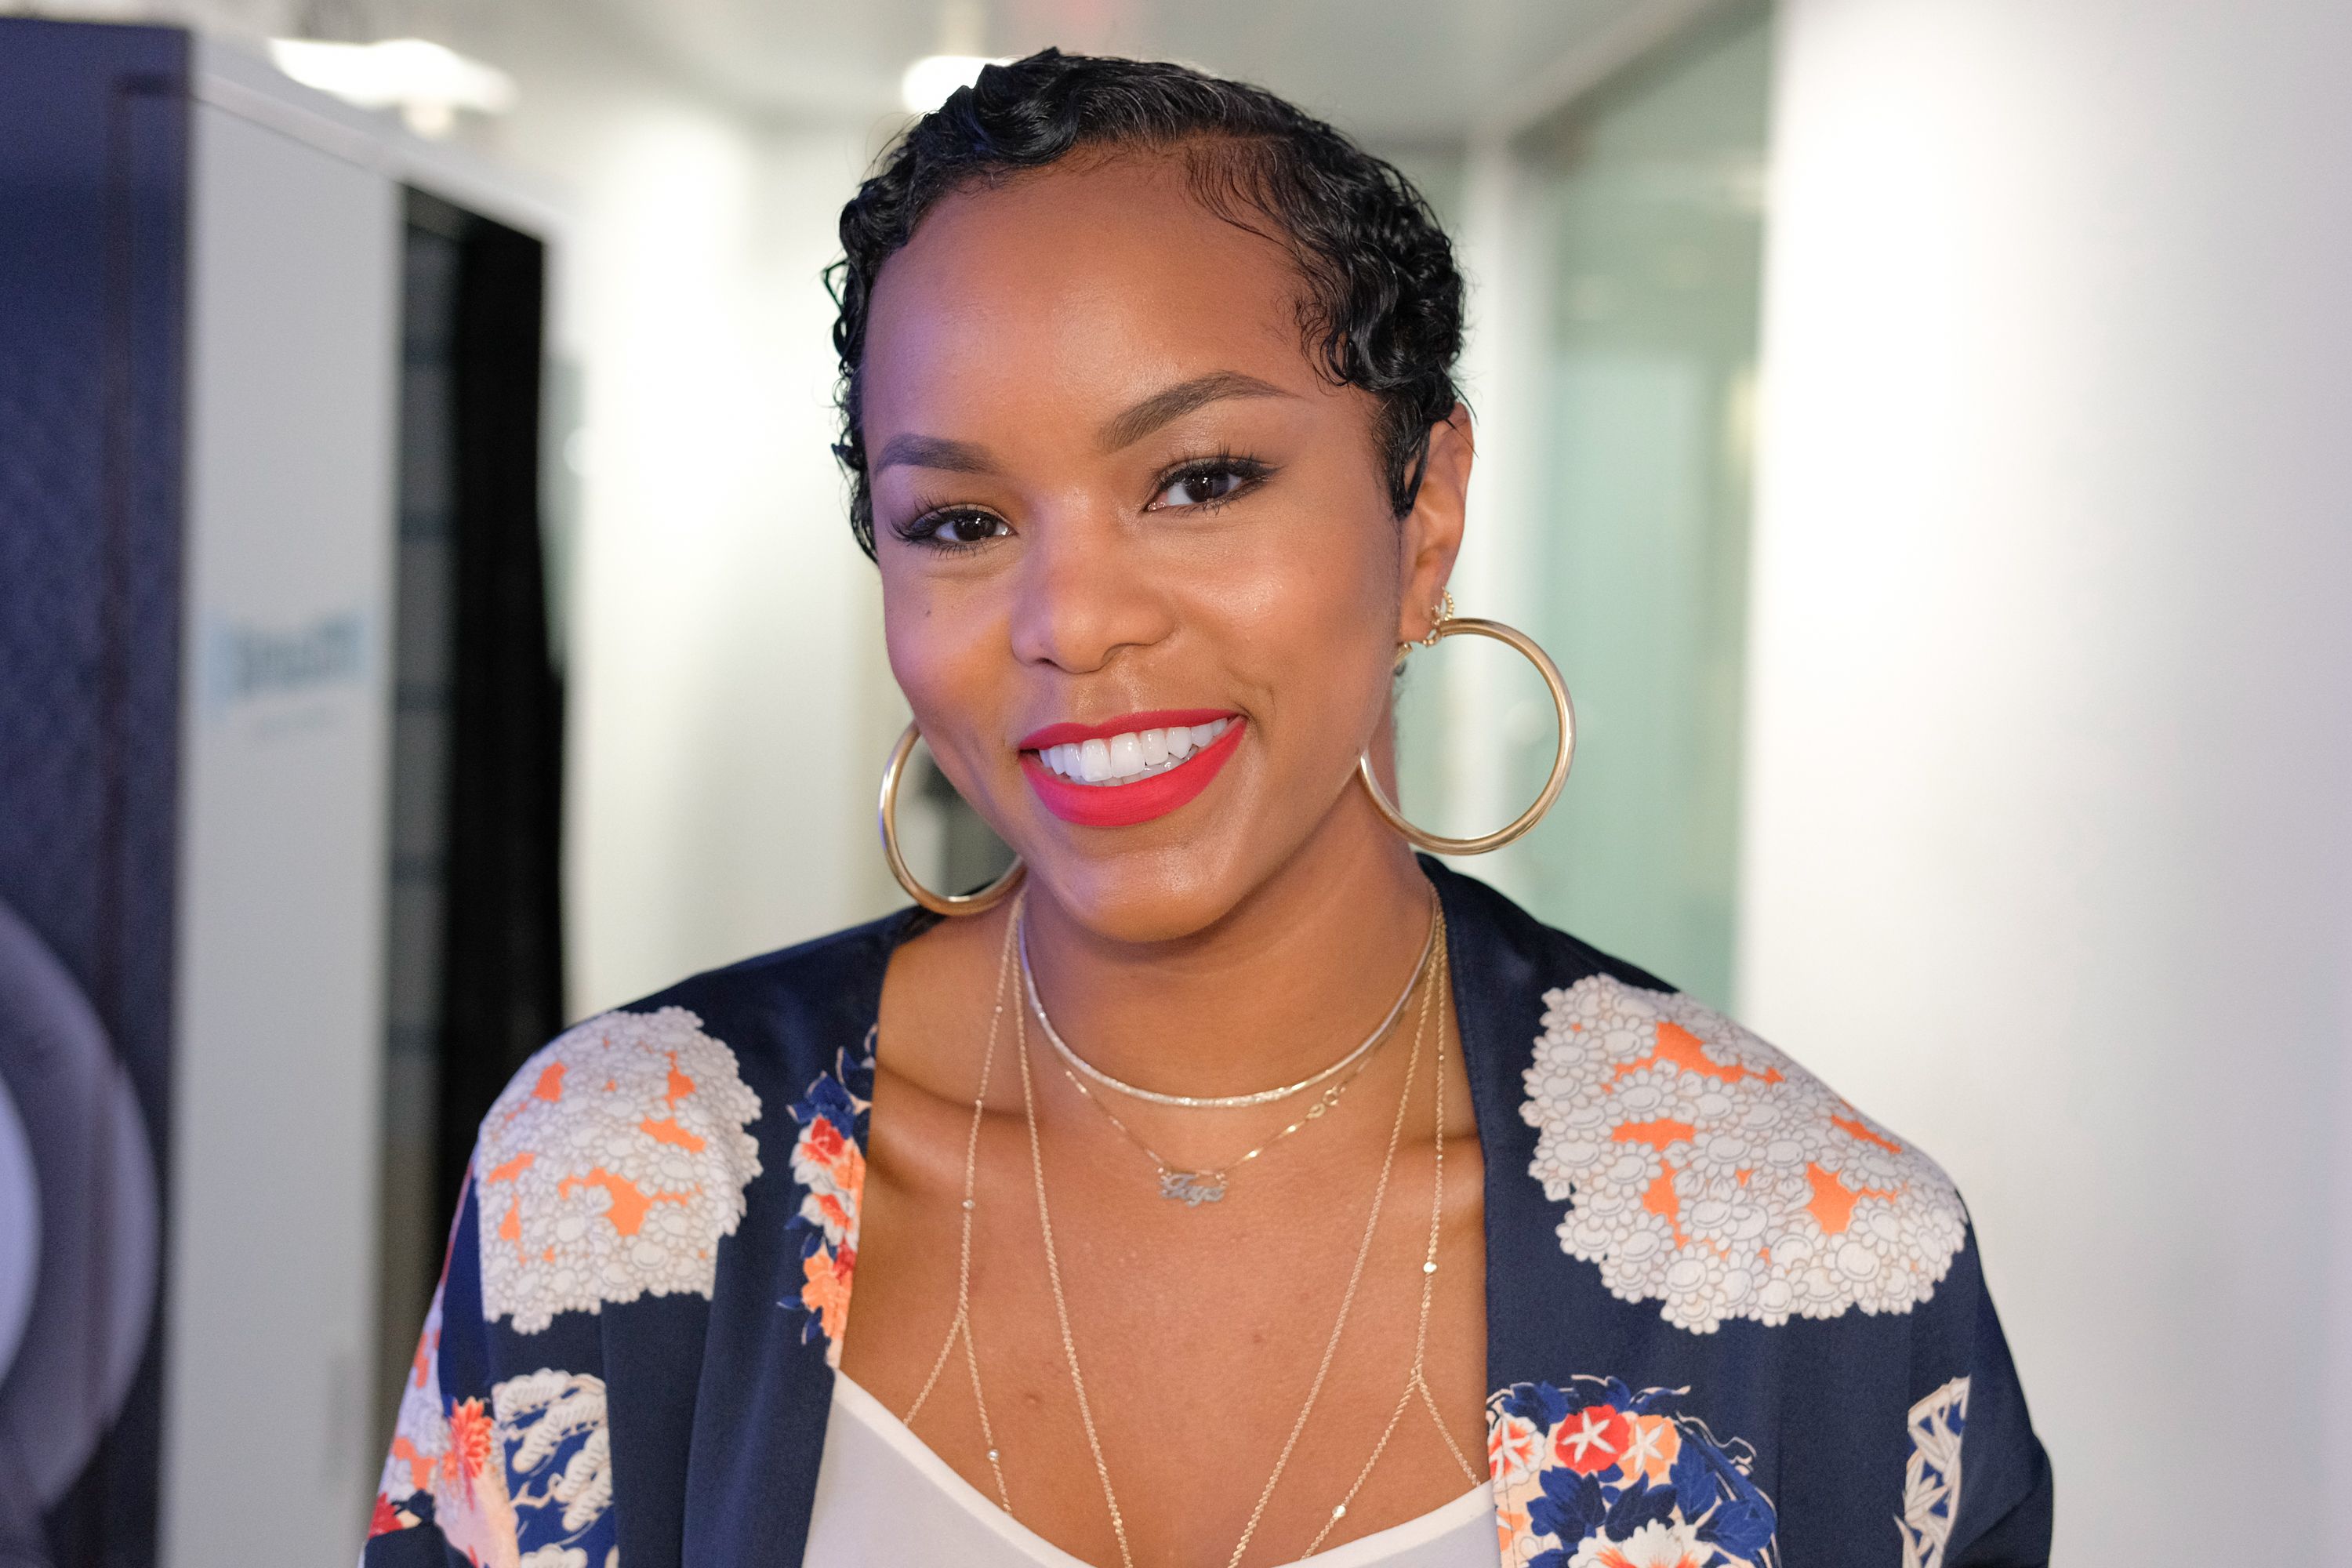 Singer LeToya Luckett visits the SiriusXM Studios on April 19, 2017. | Photo: Getty Images